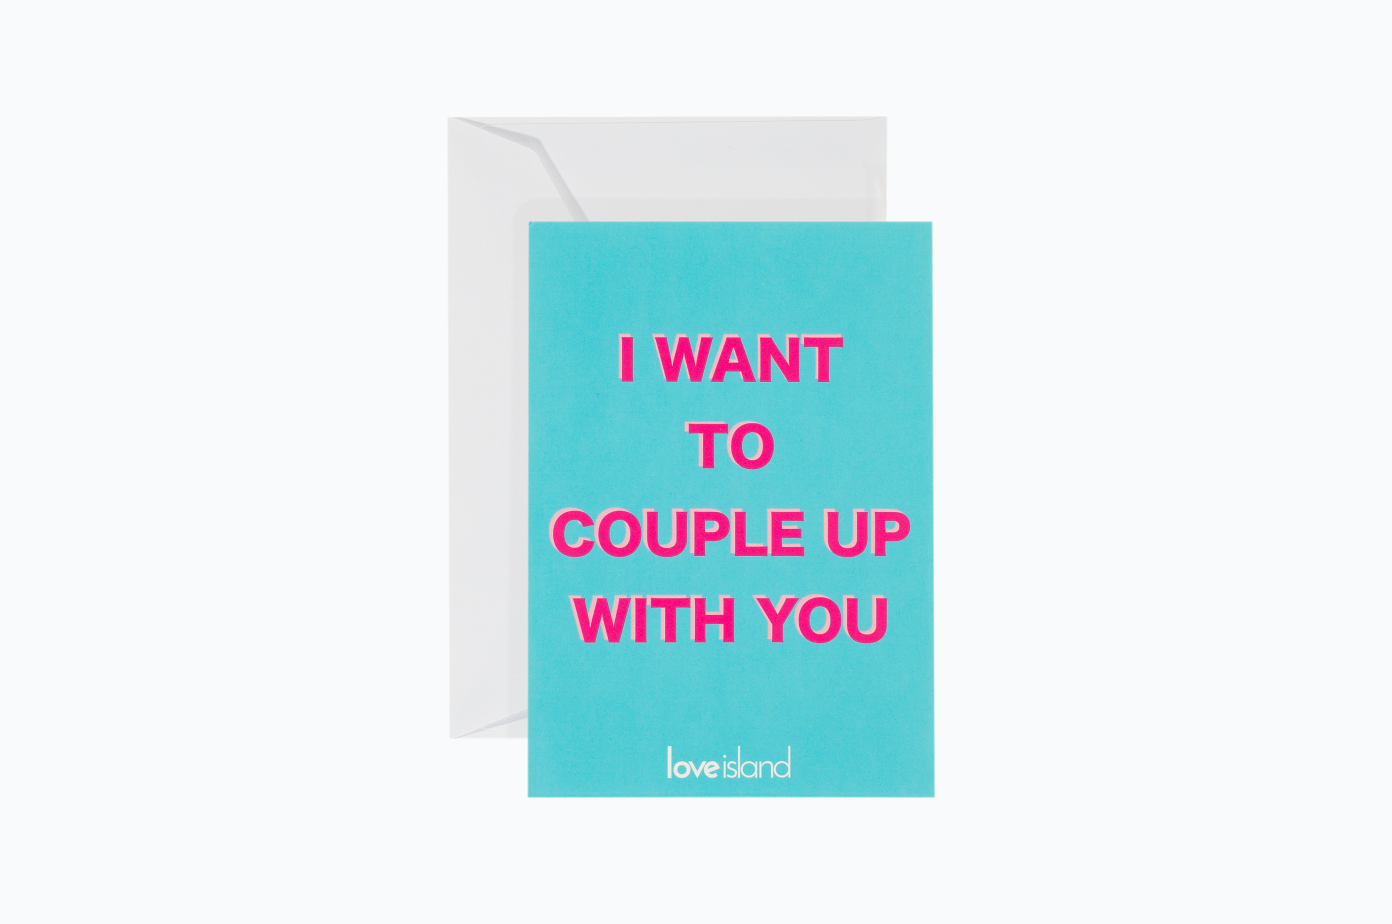 Official Love Island Greeting Cards - Pack of 5